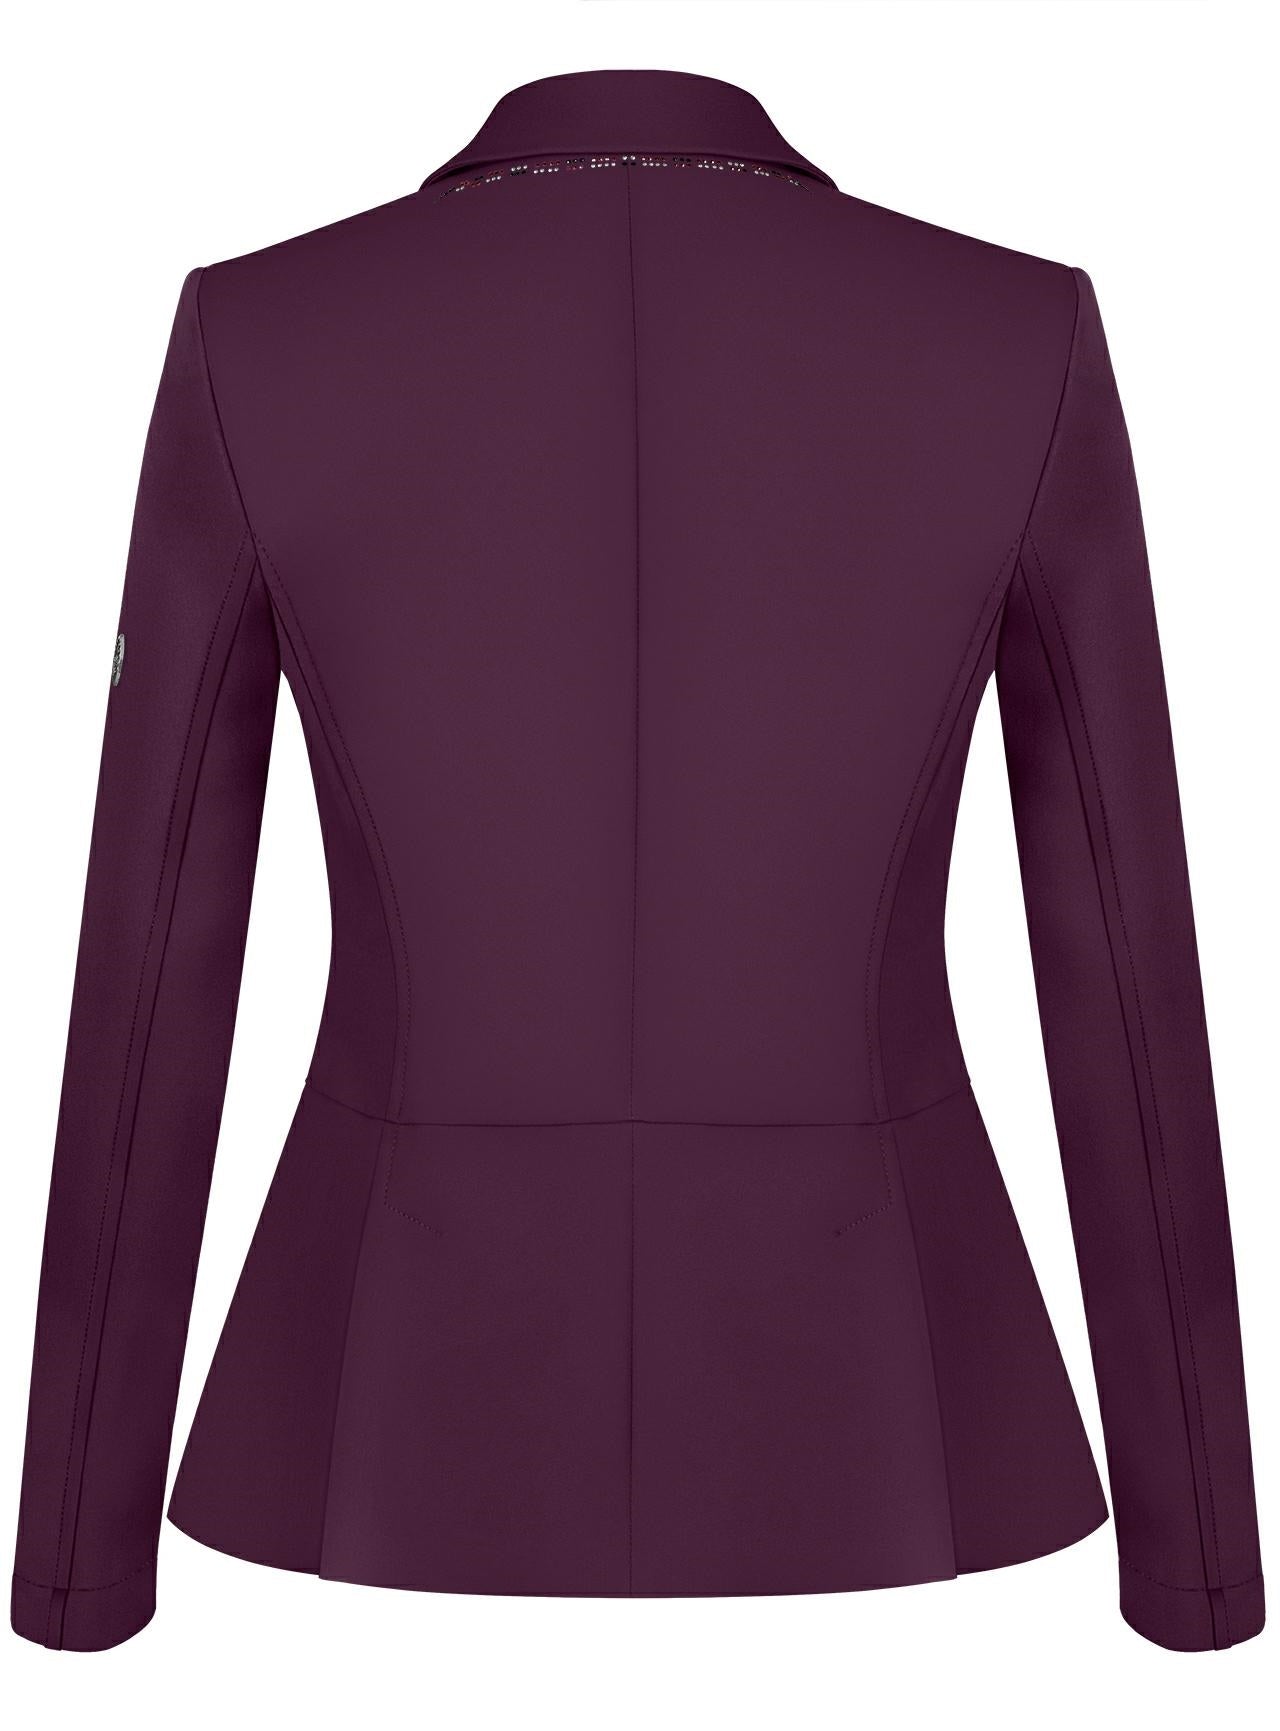 Fair Play Natalie Competition Jacket - Royal Berry